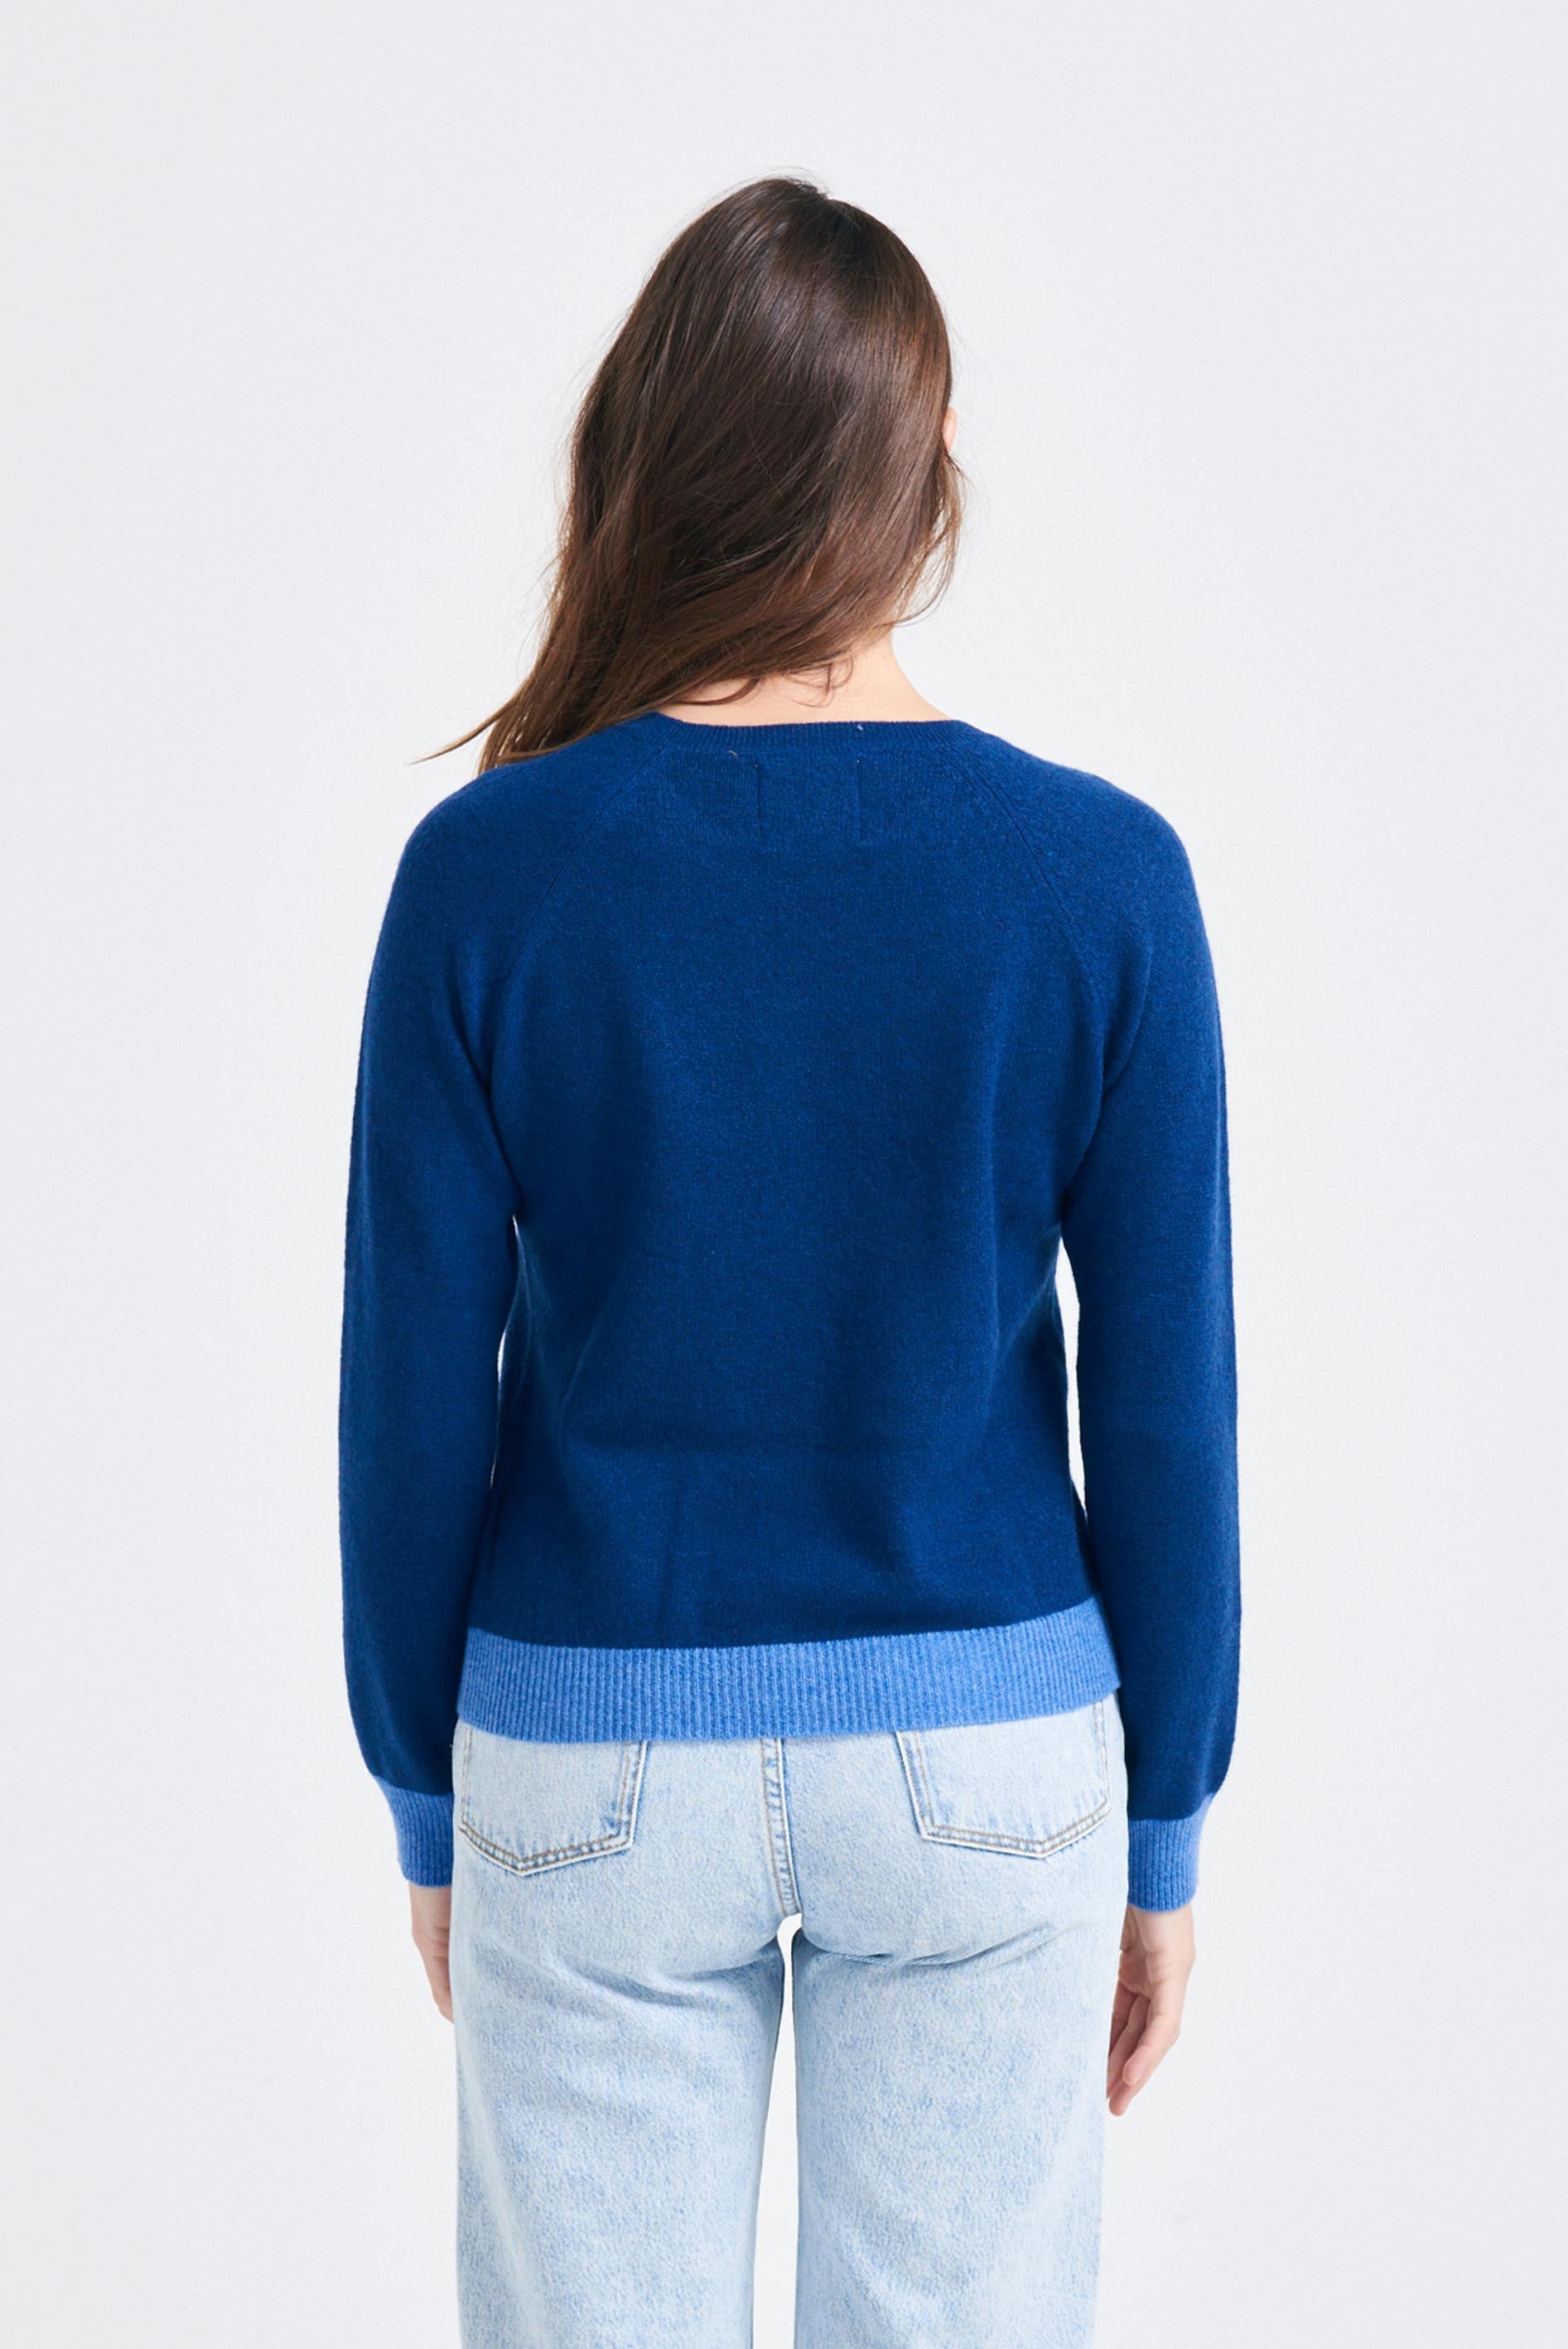 Brown haired female model wearing Jumper1234 denim cashmere crew neck jumper with periwinkle contrast ribs facing away from camera